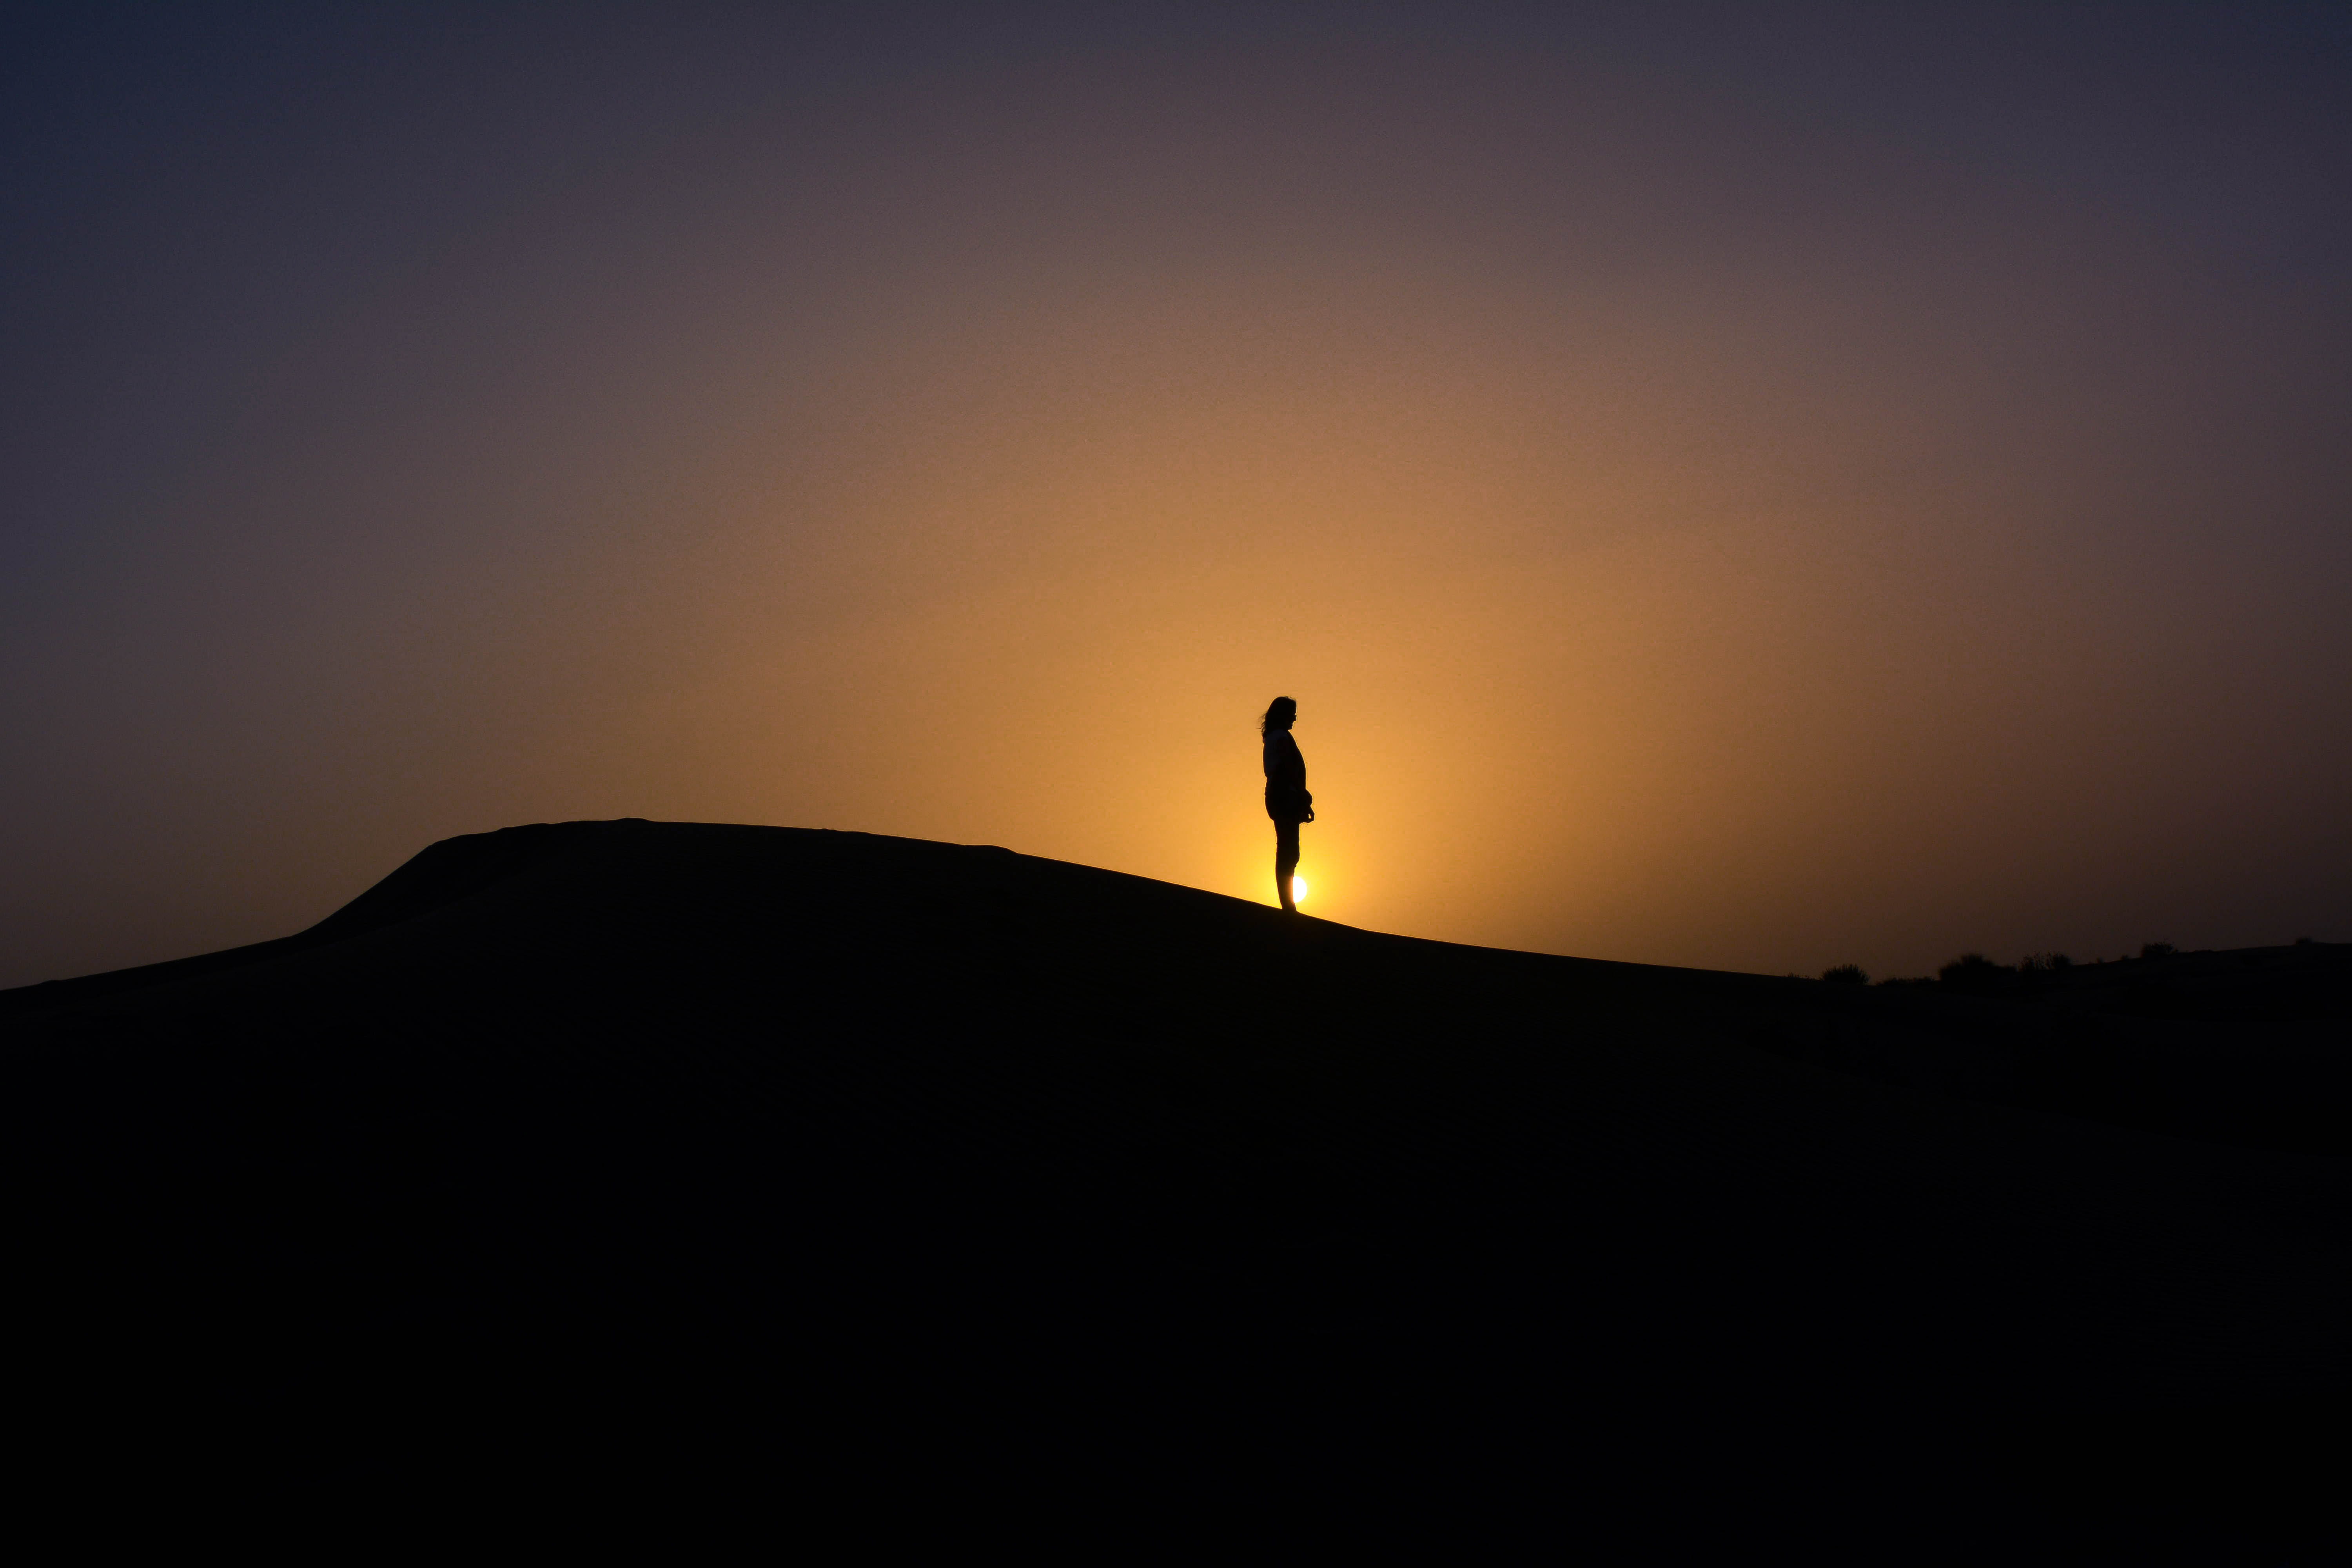 silhouette of person standing on mountain with sunset sun, silhouette of person standing on mound